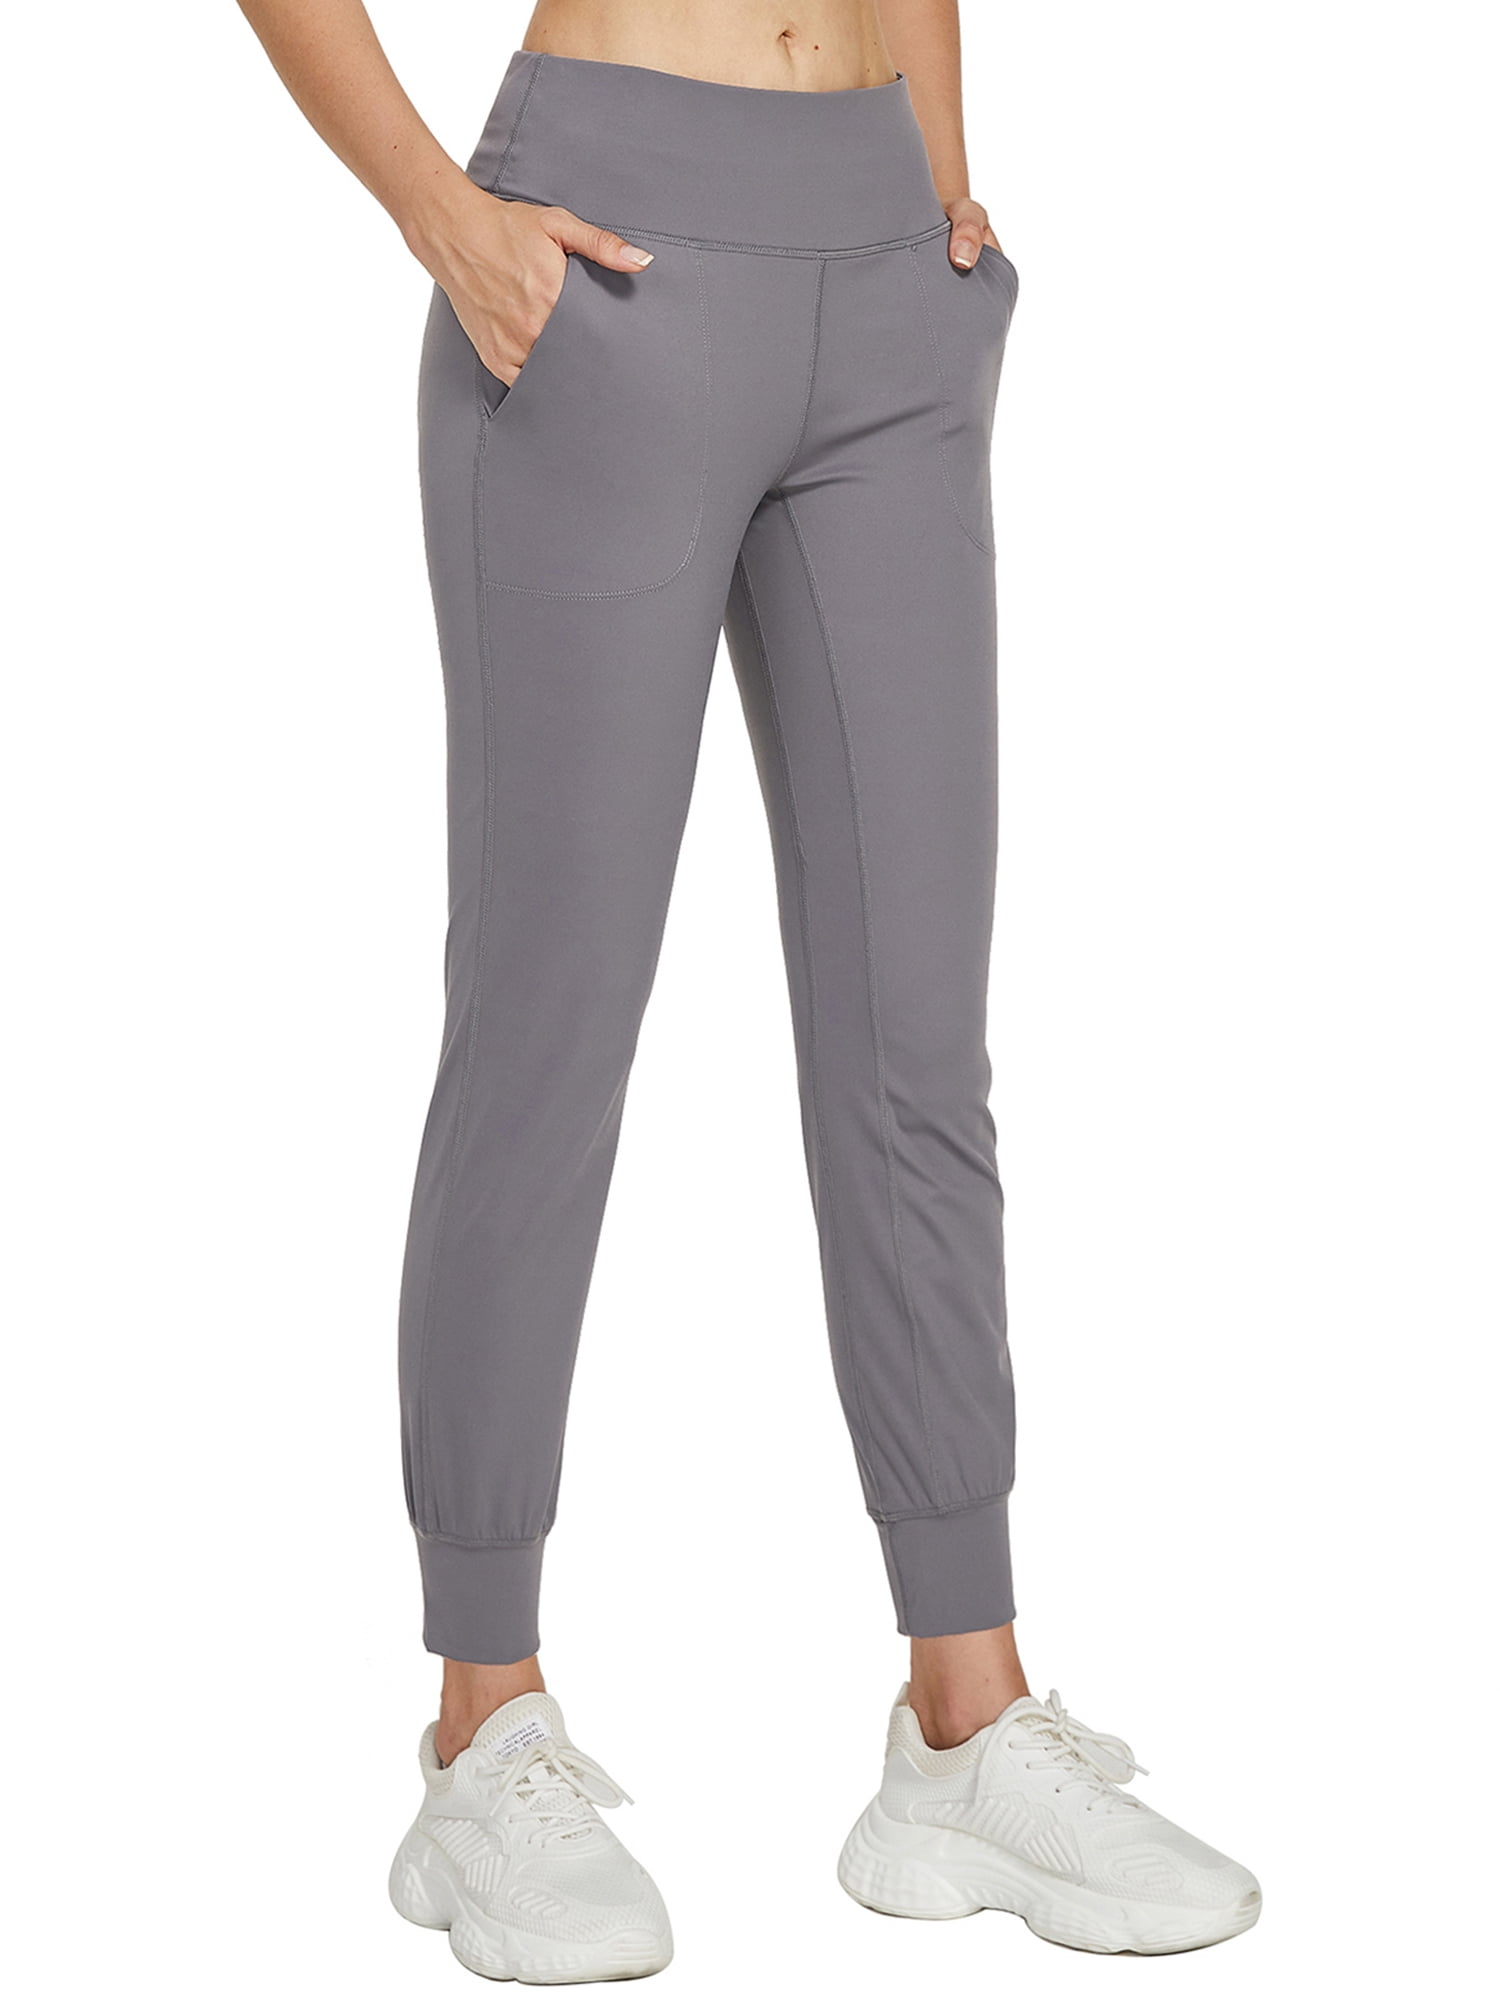 FEDTOSING Fit Joggers for Women High Waist Tapered Sweatpants Light Gray,up  to Size XL 